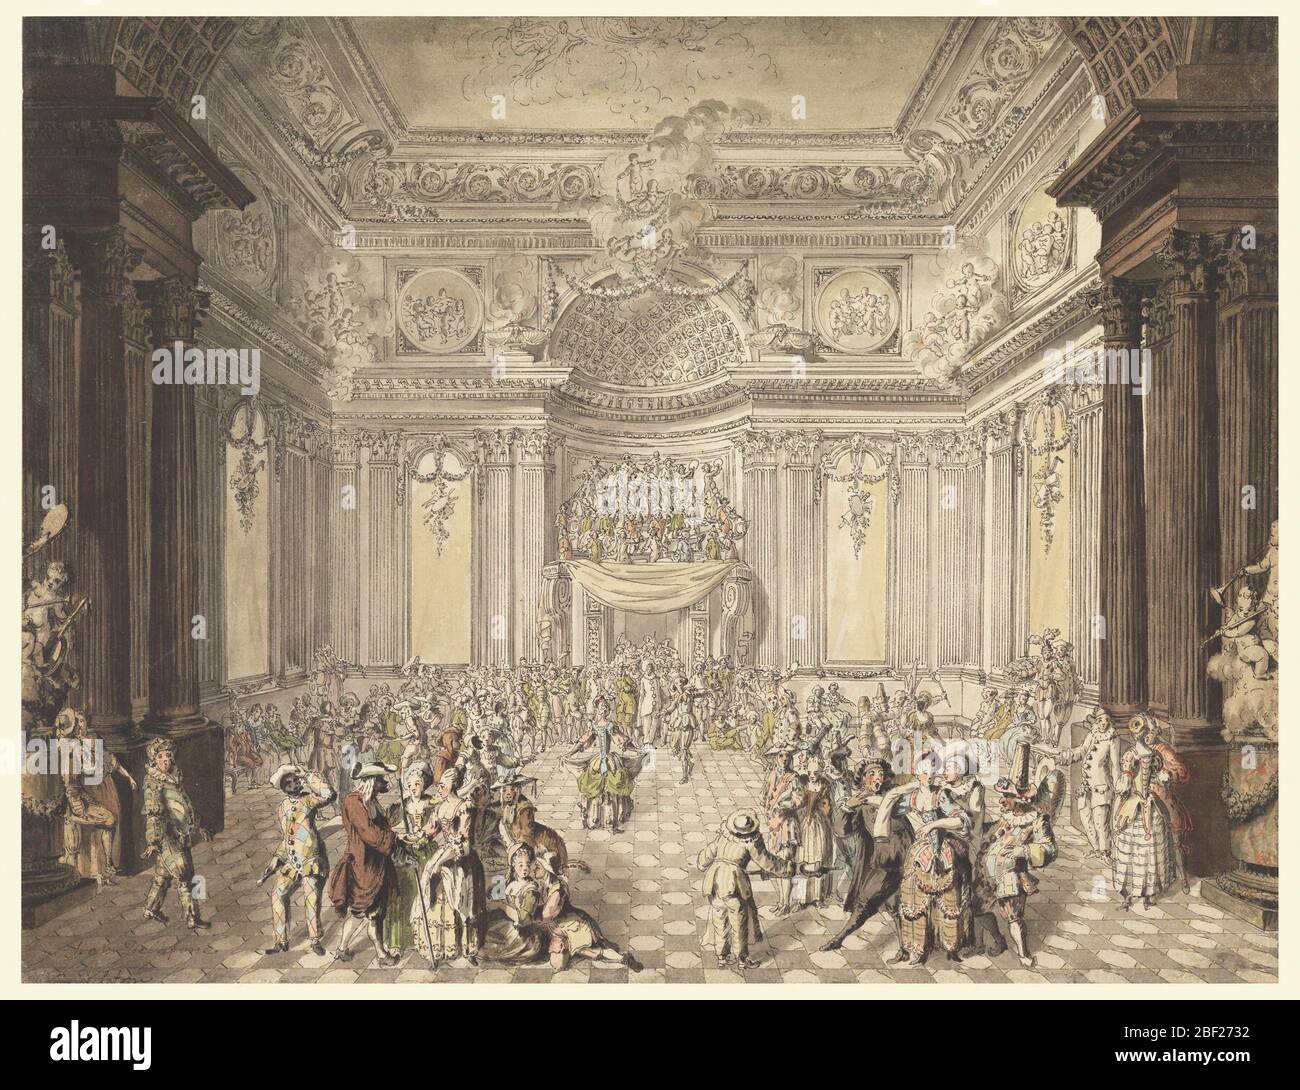 View of Masquerade Ball. Crowd in formal dress in highly ornate hall. Musicians on a loft over the door in the center rear. Stock Photo